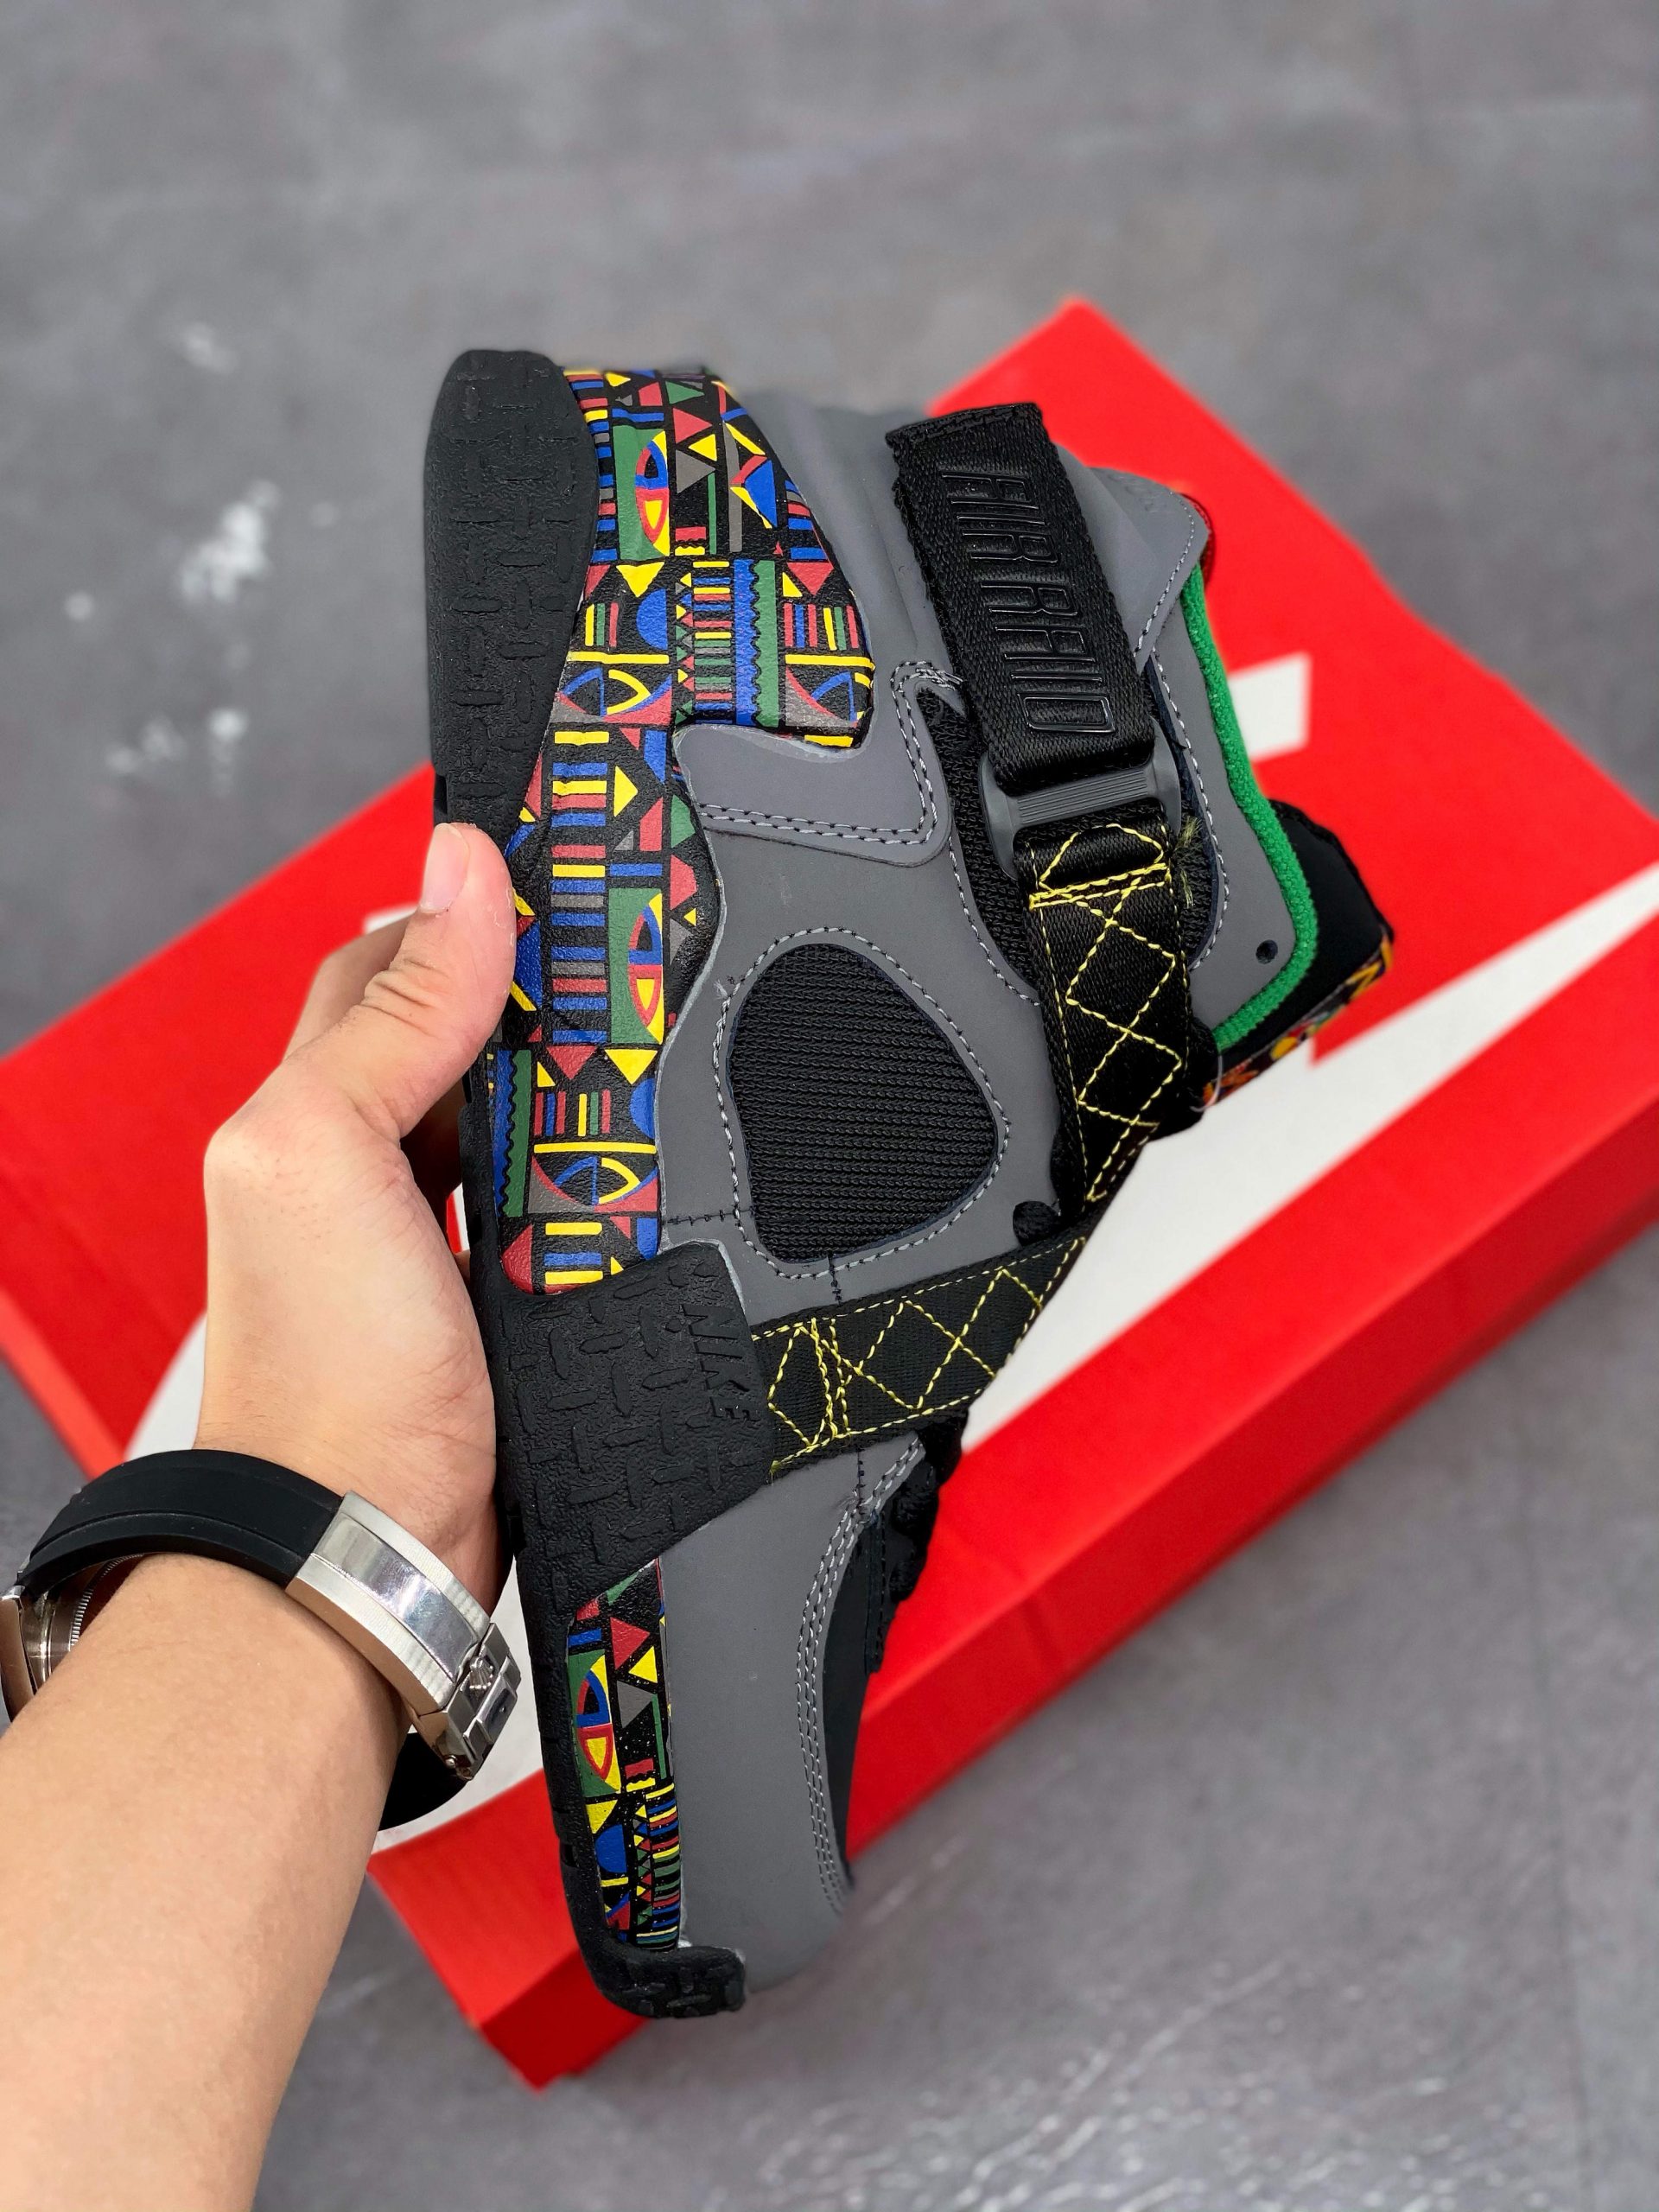 NIKE AIR RAID 'URBAN JUNGLE' UNBOXING & REVIEW!! EARLY LOOK!! 